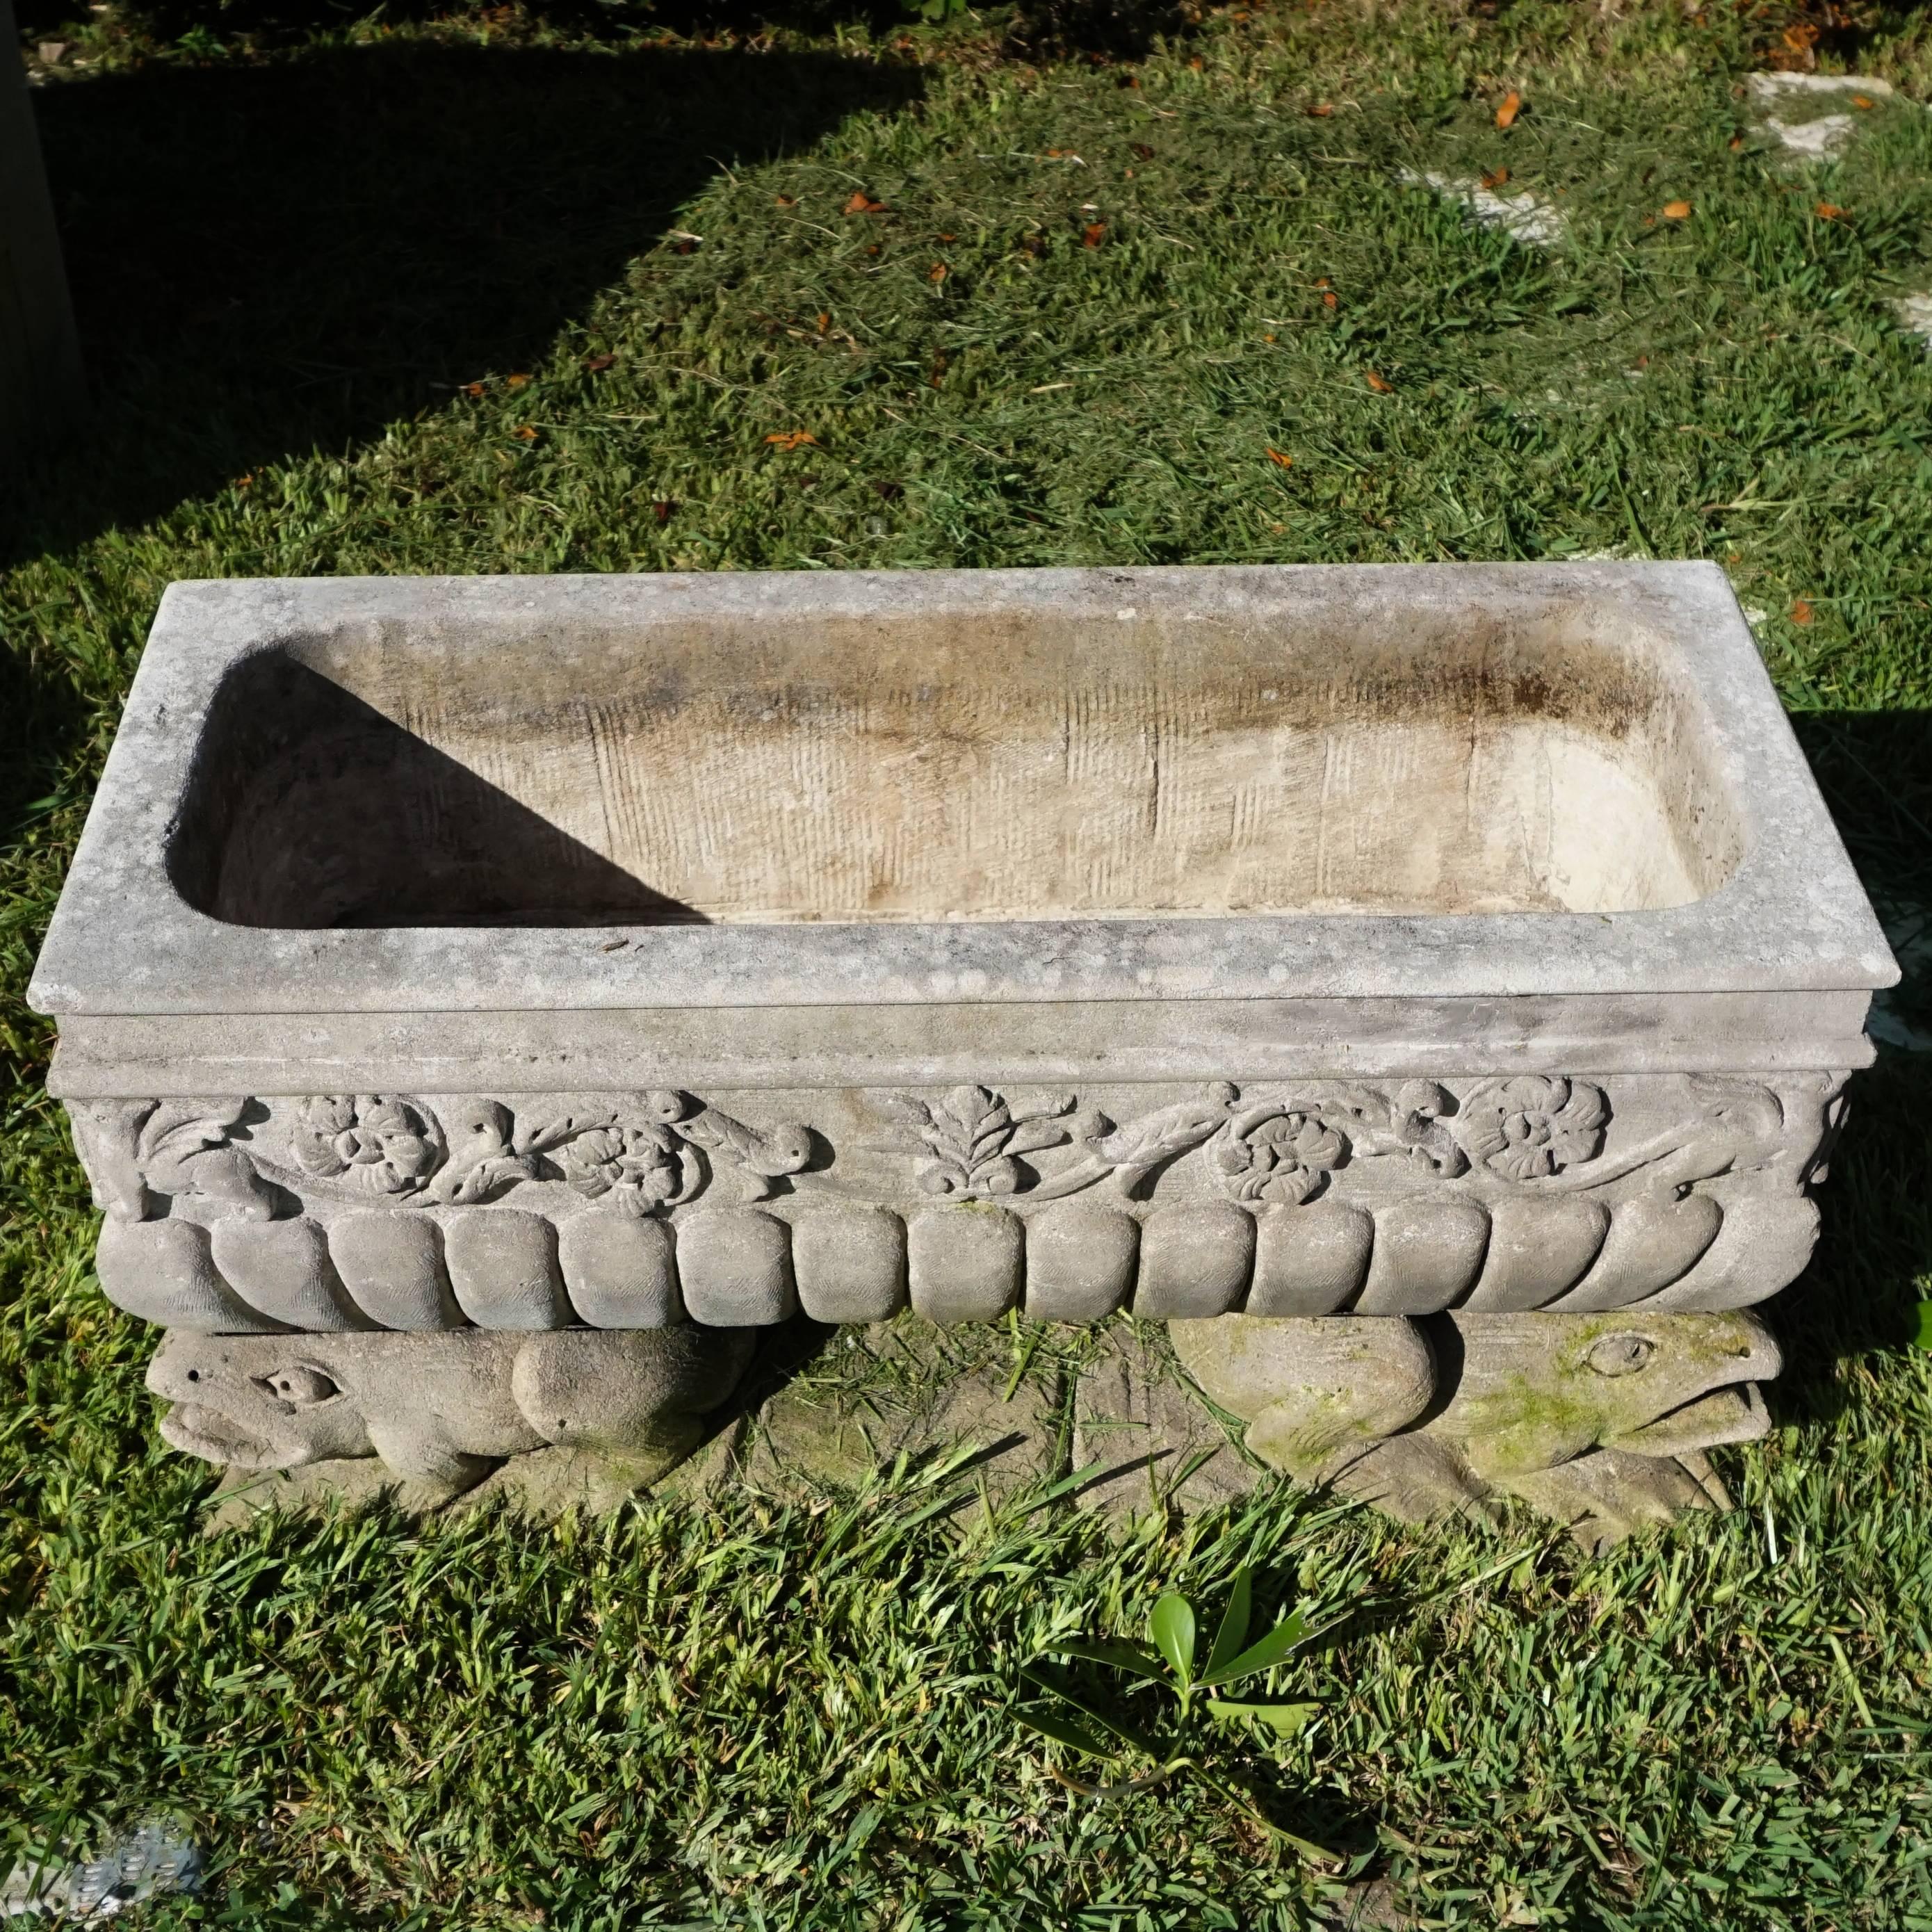 Hand-Carved Mid-20th Century Italian Trough Jardiniere with Frogs in Limestone